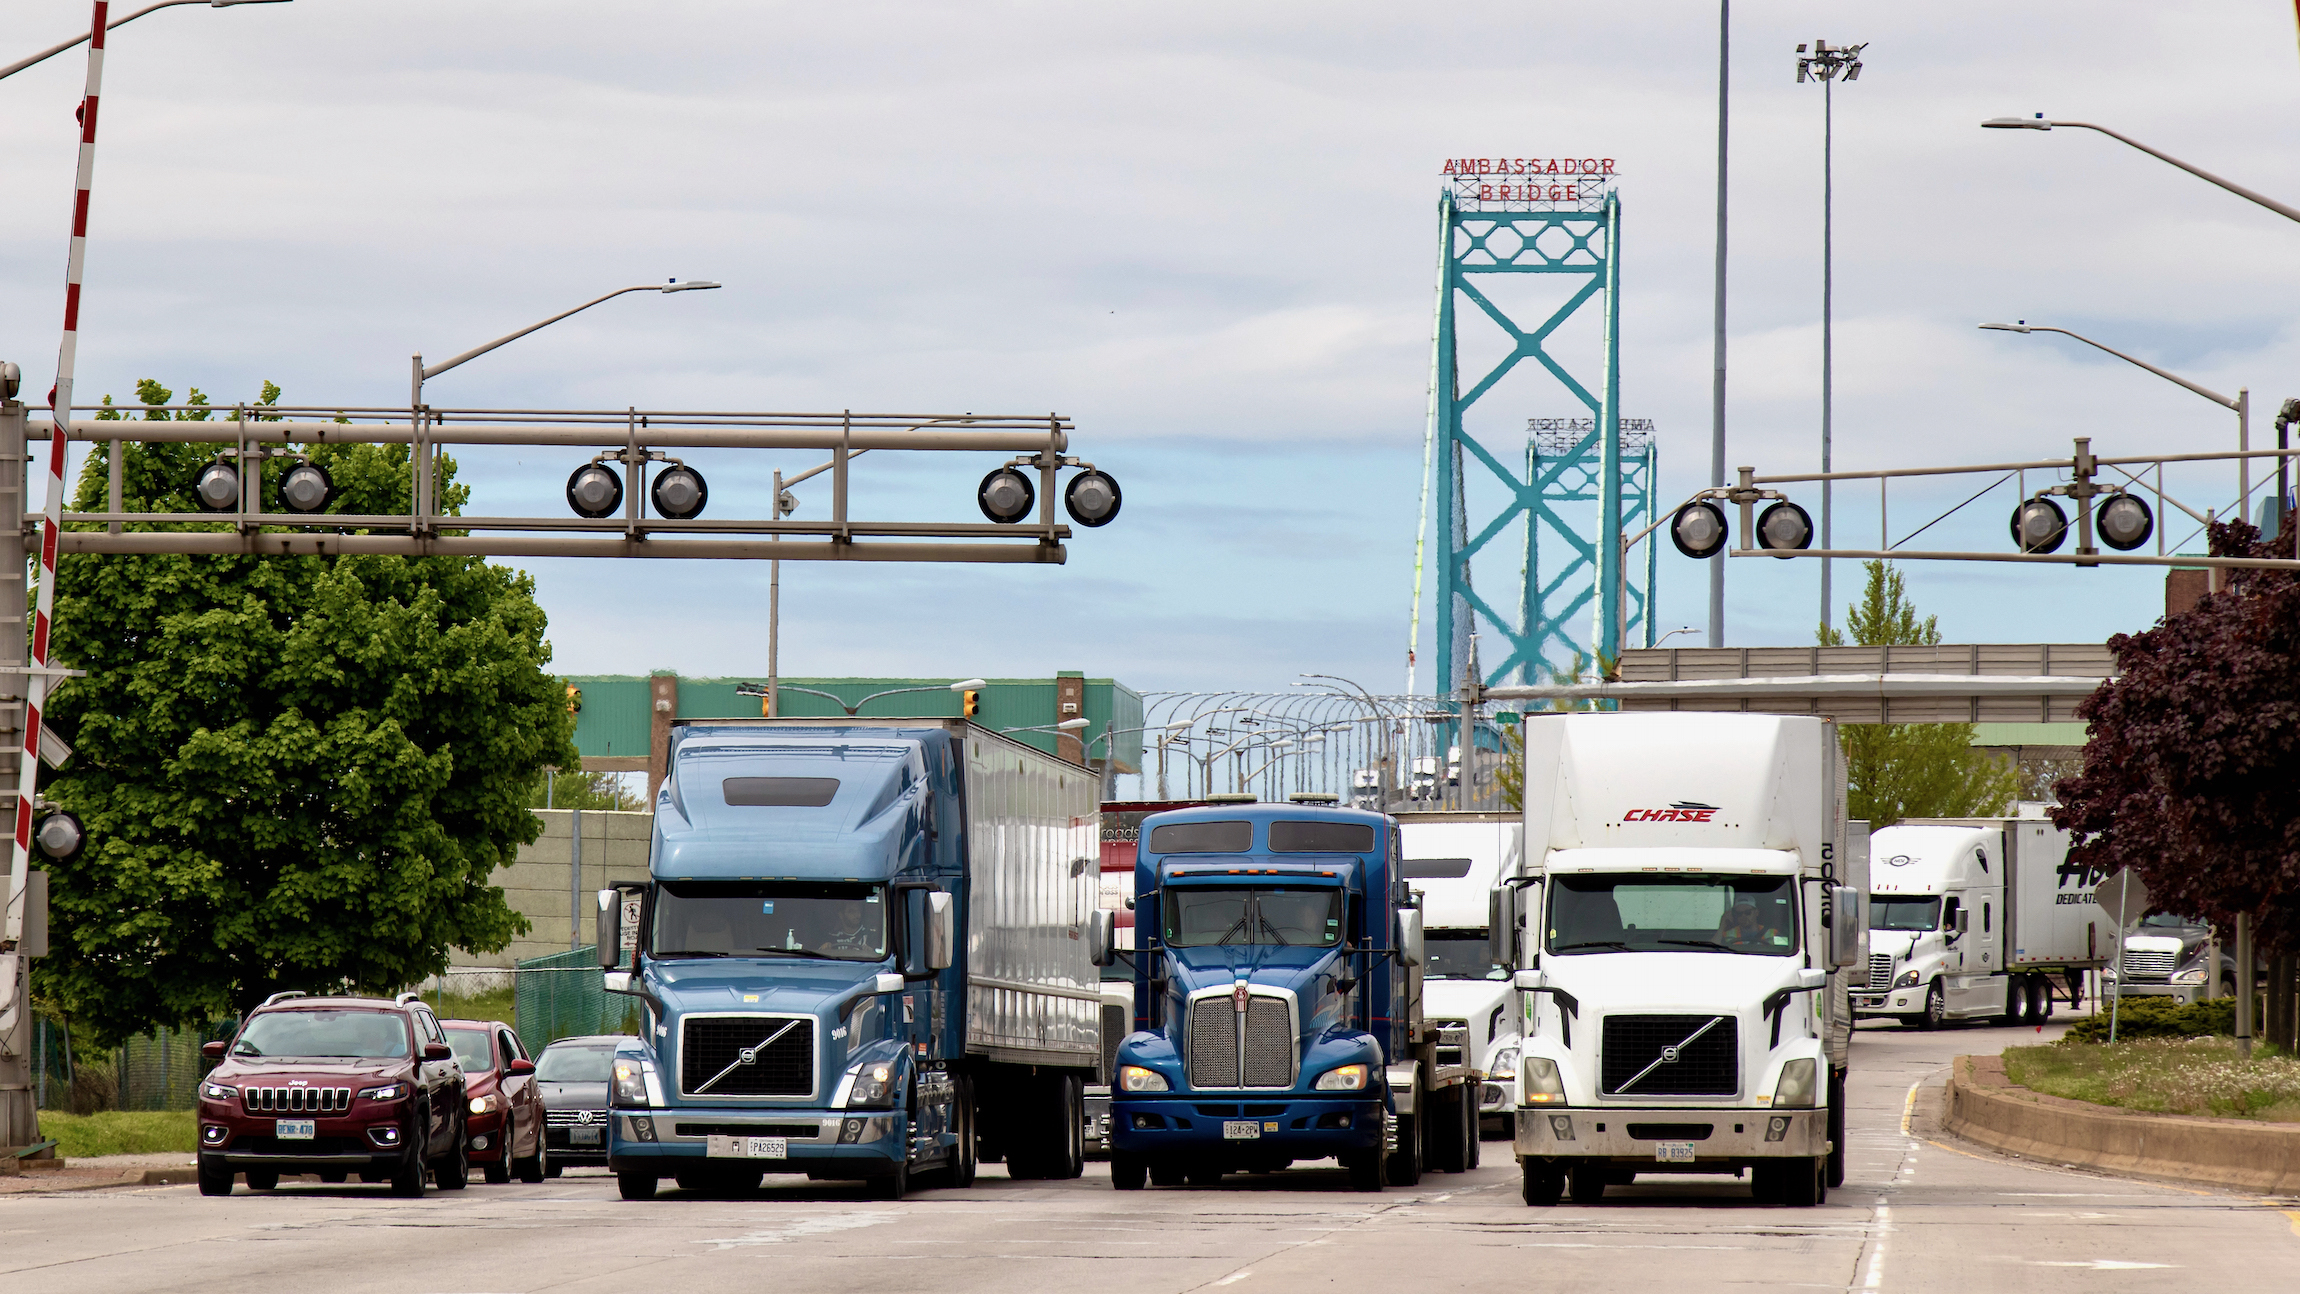 Trucks and vehicles seen leaving the Ambassador Bridge from Detroit entering Canada after crossing the US-Canada border, bridge seen in the background.